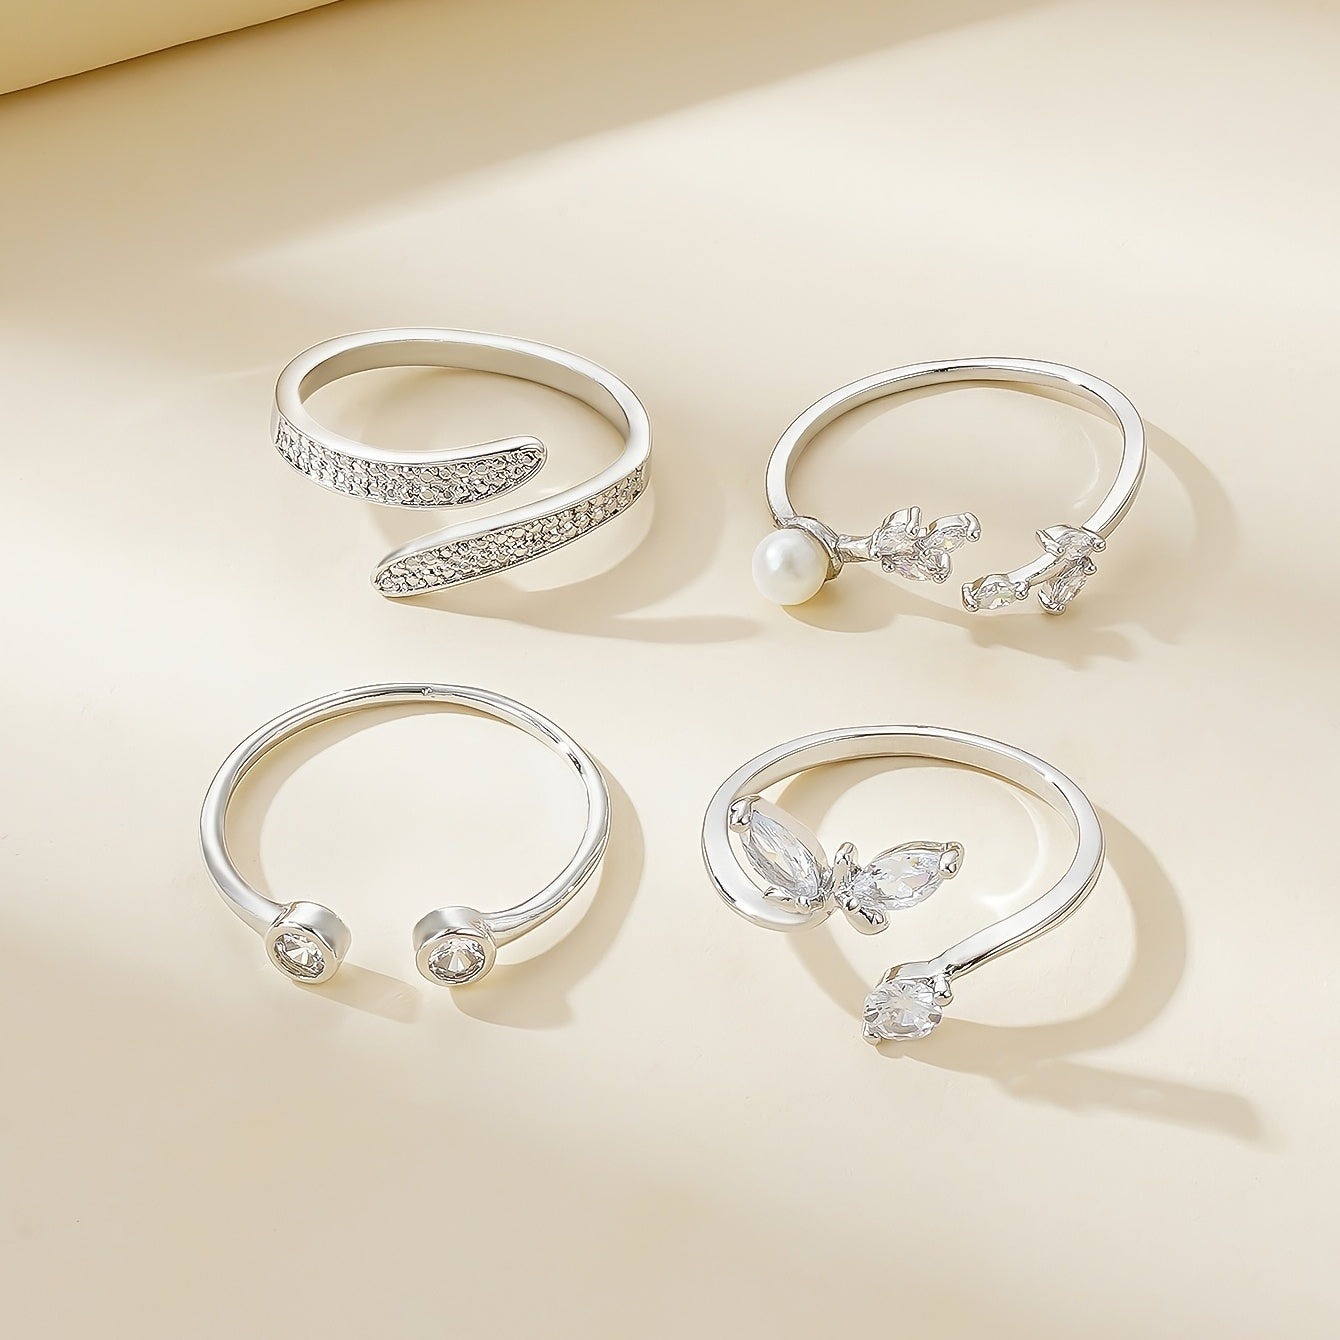 Upgrade Your Style with 4pcs of Simple Adjustable Butterfly Zircon Rings - Perfect Gift for Girls and Women